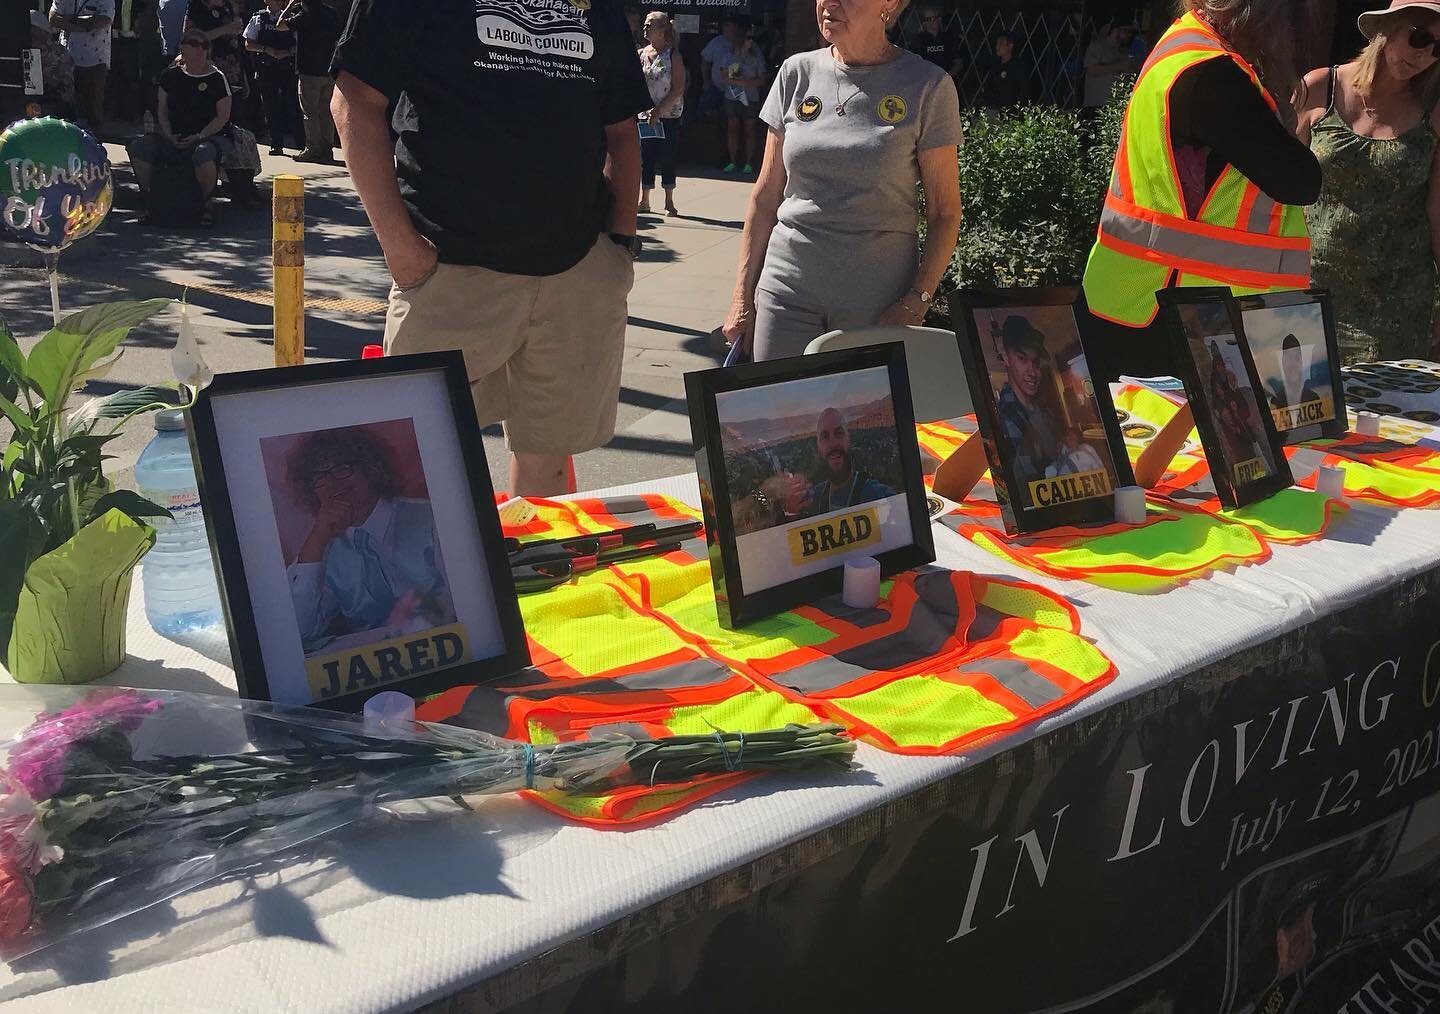 Yesterday was the 1-year anniversary of the terrible tragedy that claimed 5 lives. At the somber memorial ceremony we heard from parents and officials, and held a moment of silence to reflect and remember. Every worker deserves to come home safe. #ke